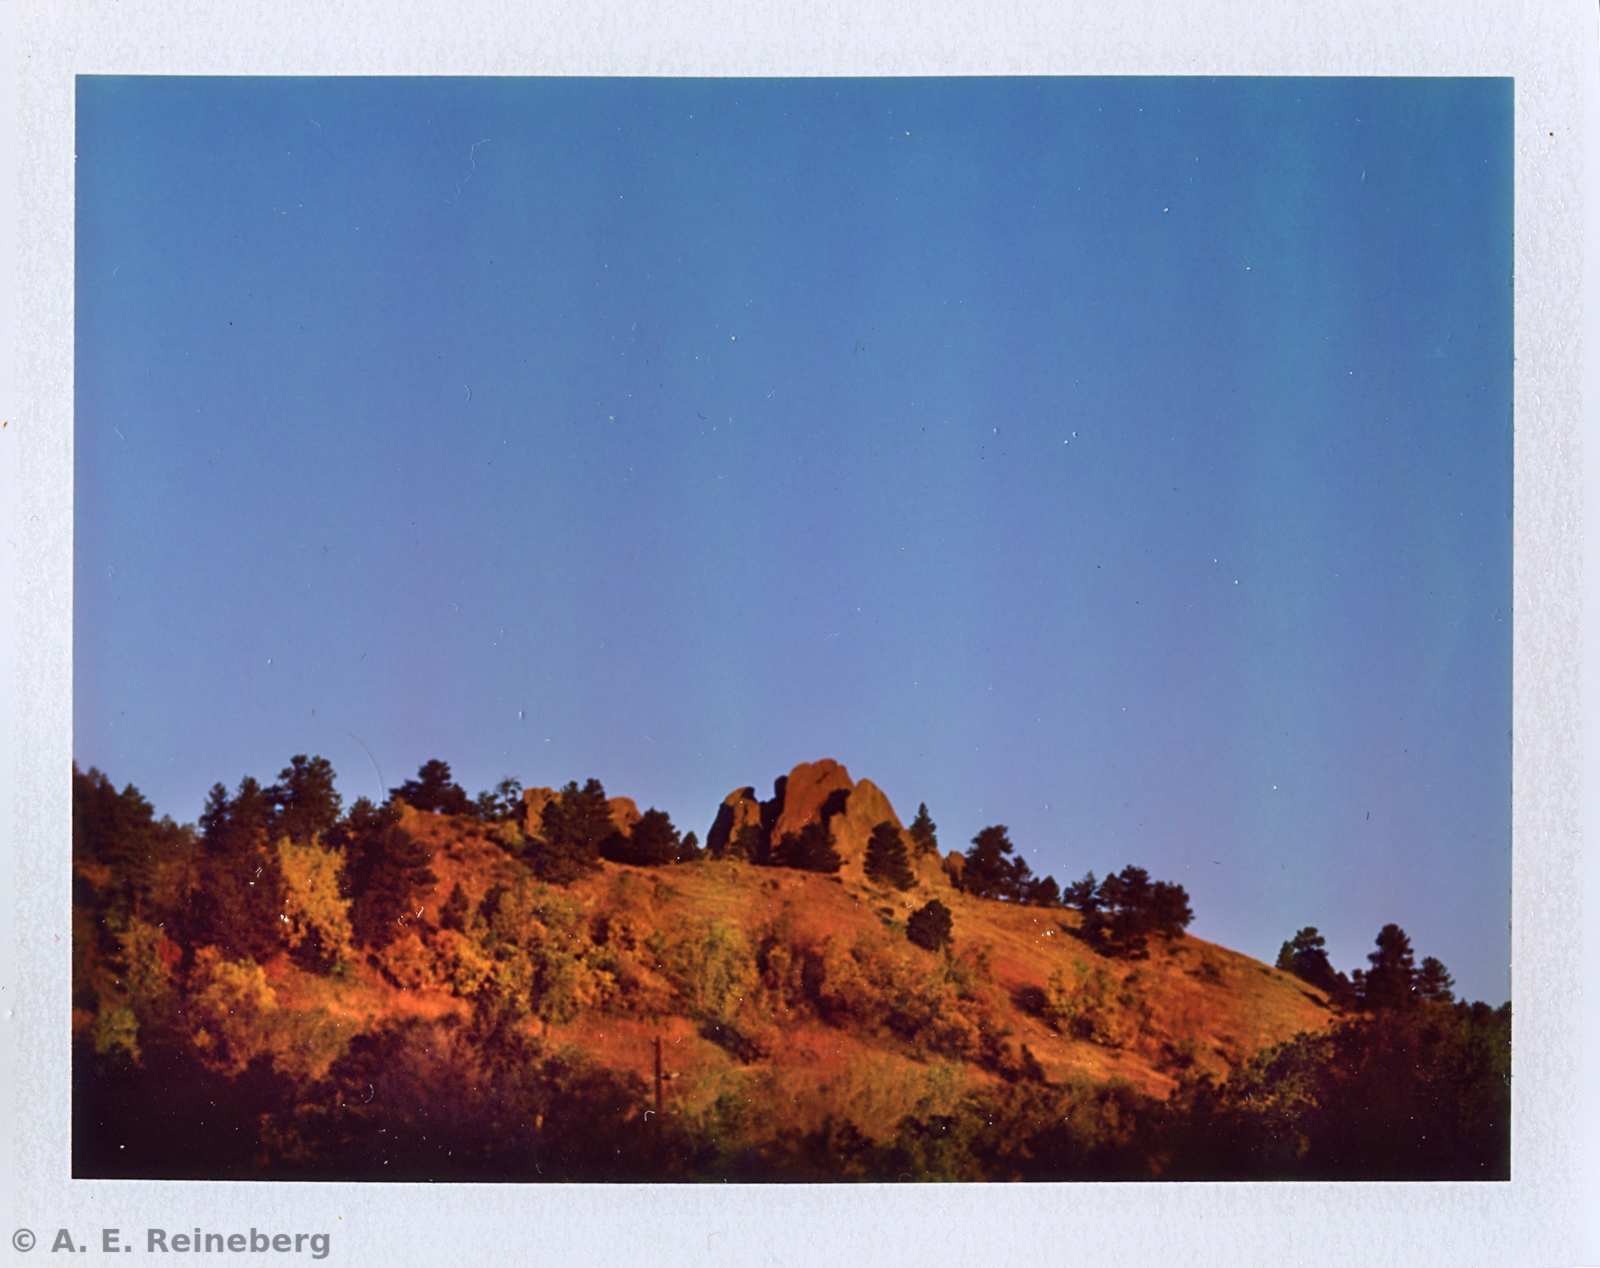 Polaroid project by Andrew Reineberg